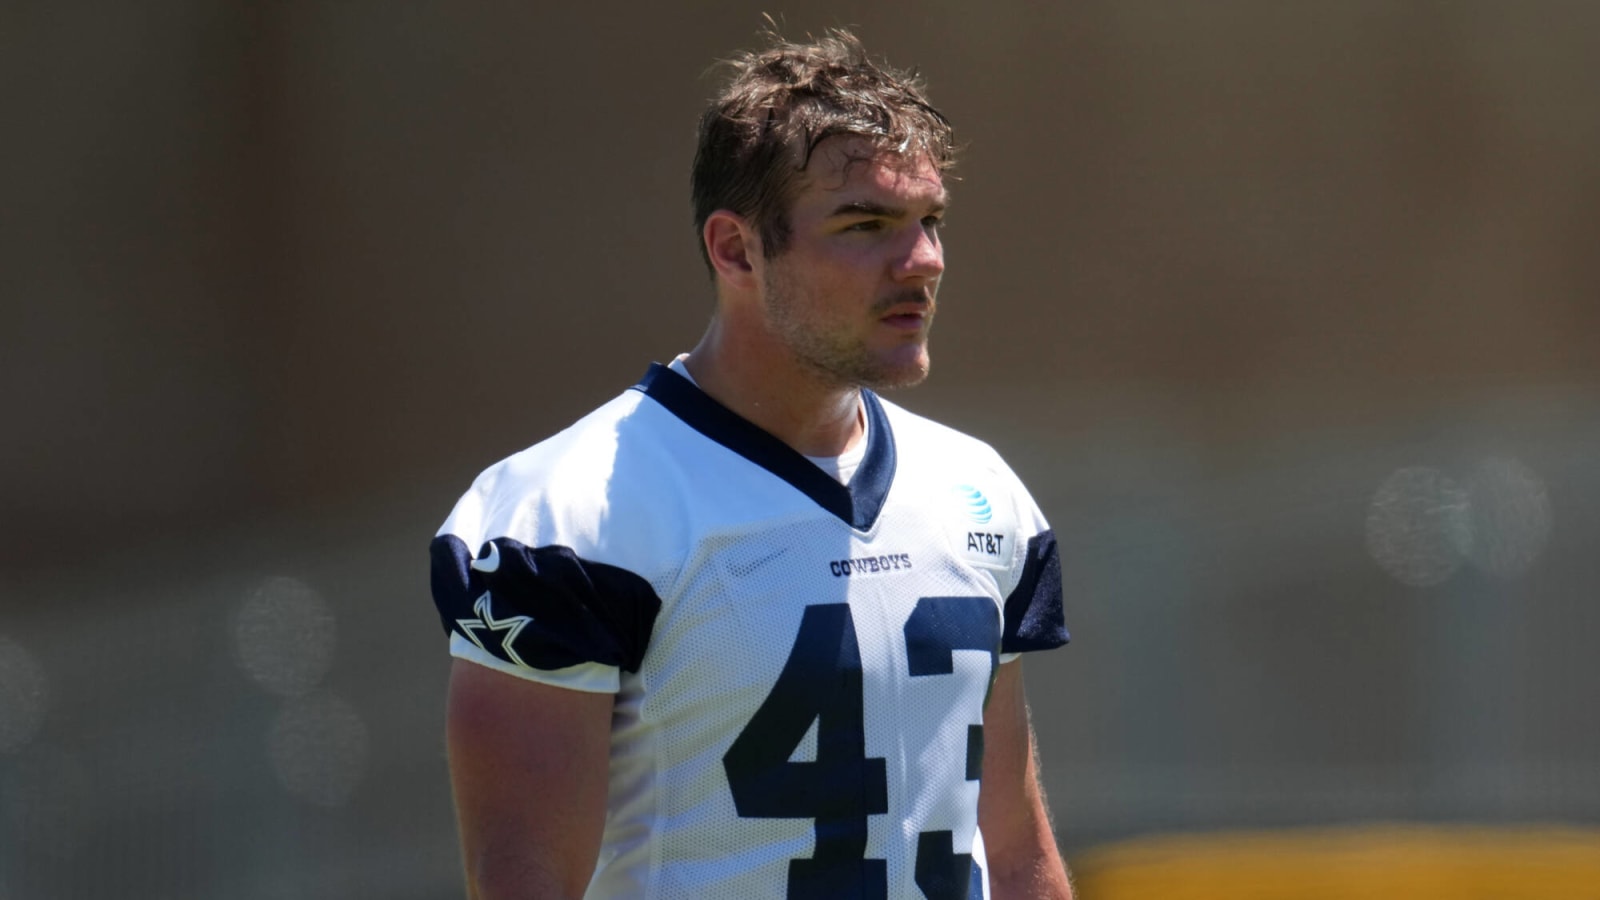 Dallas Cowboys sign veteran long snapper Trent Sieg to new contract